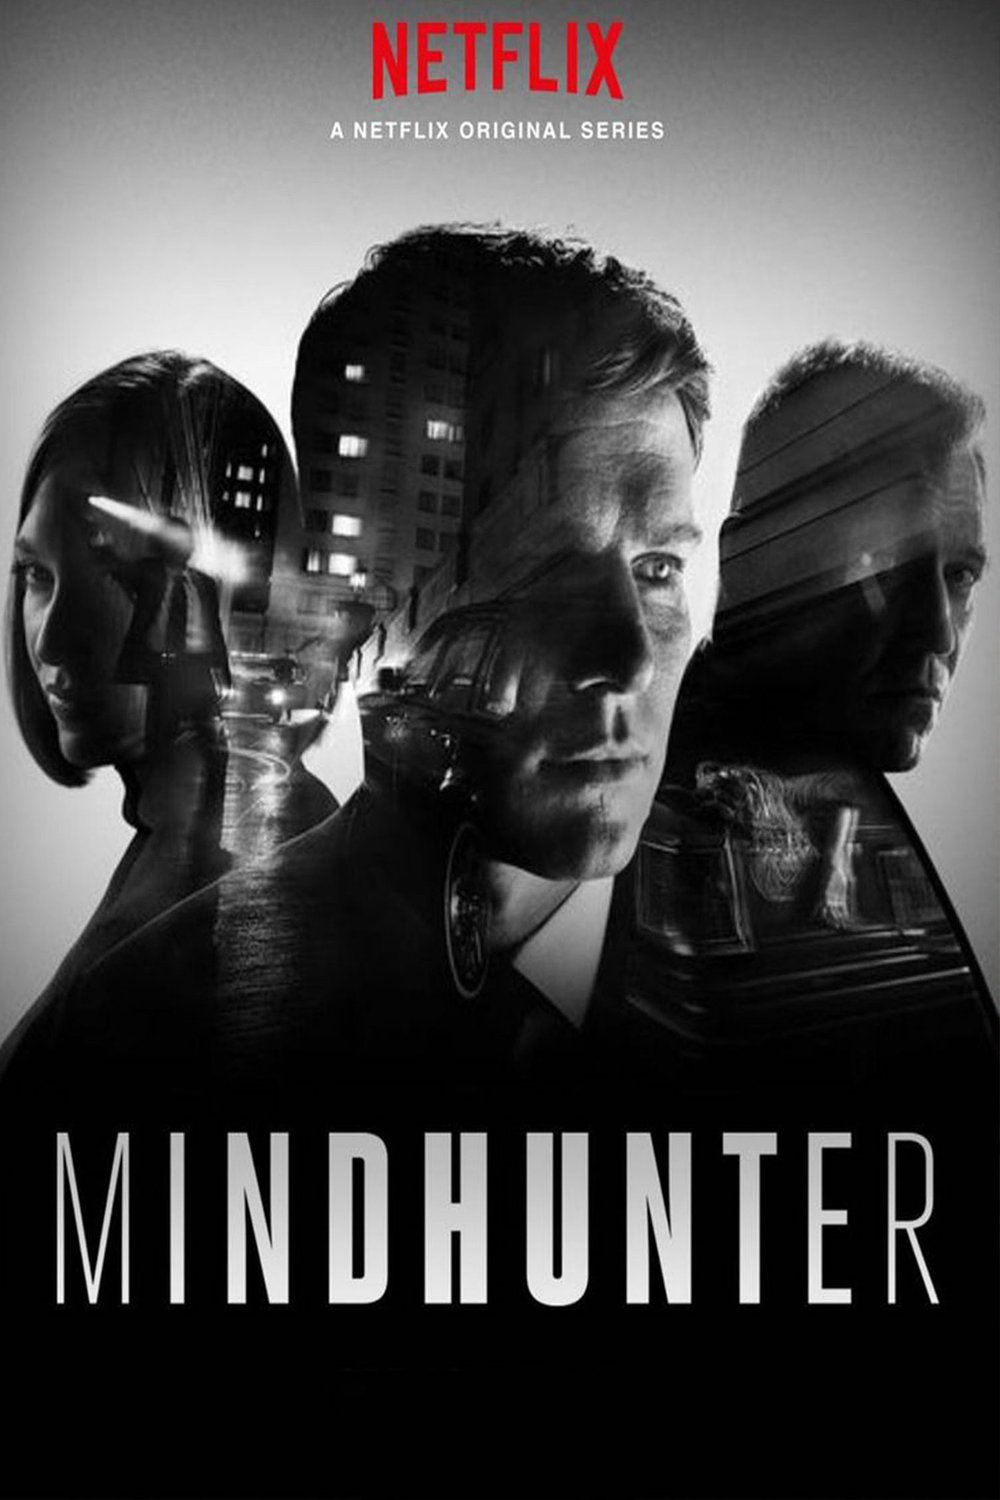 Poster of the movie Mindhunter